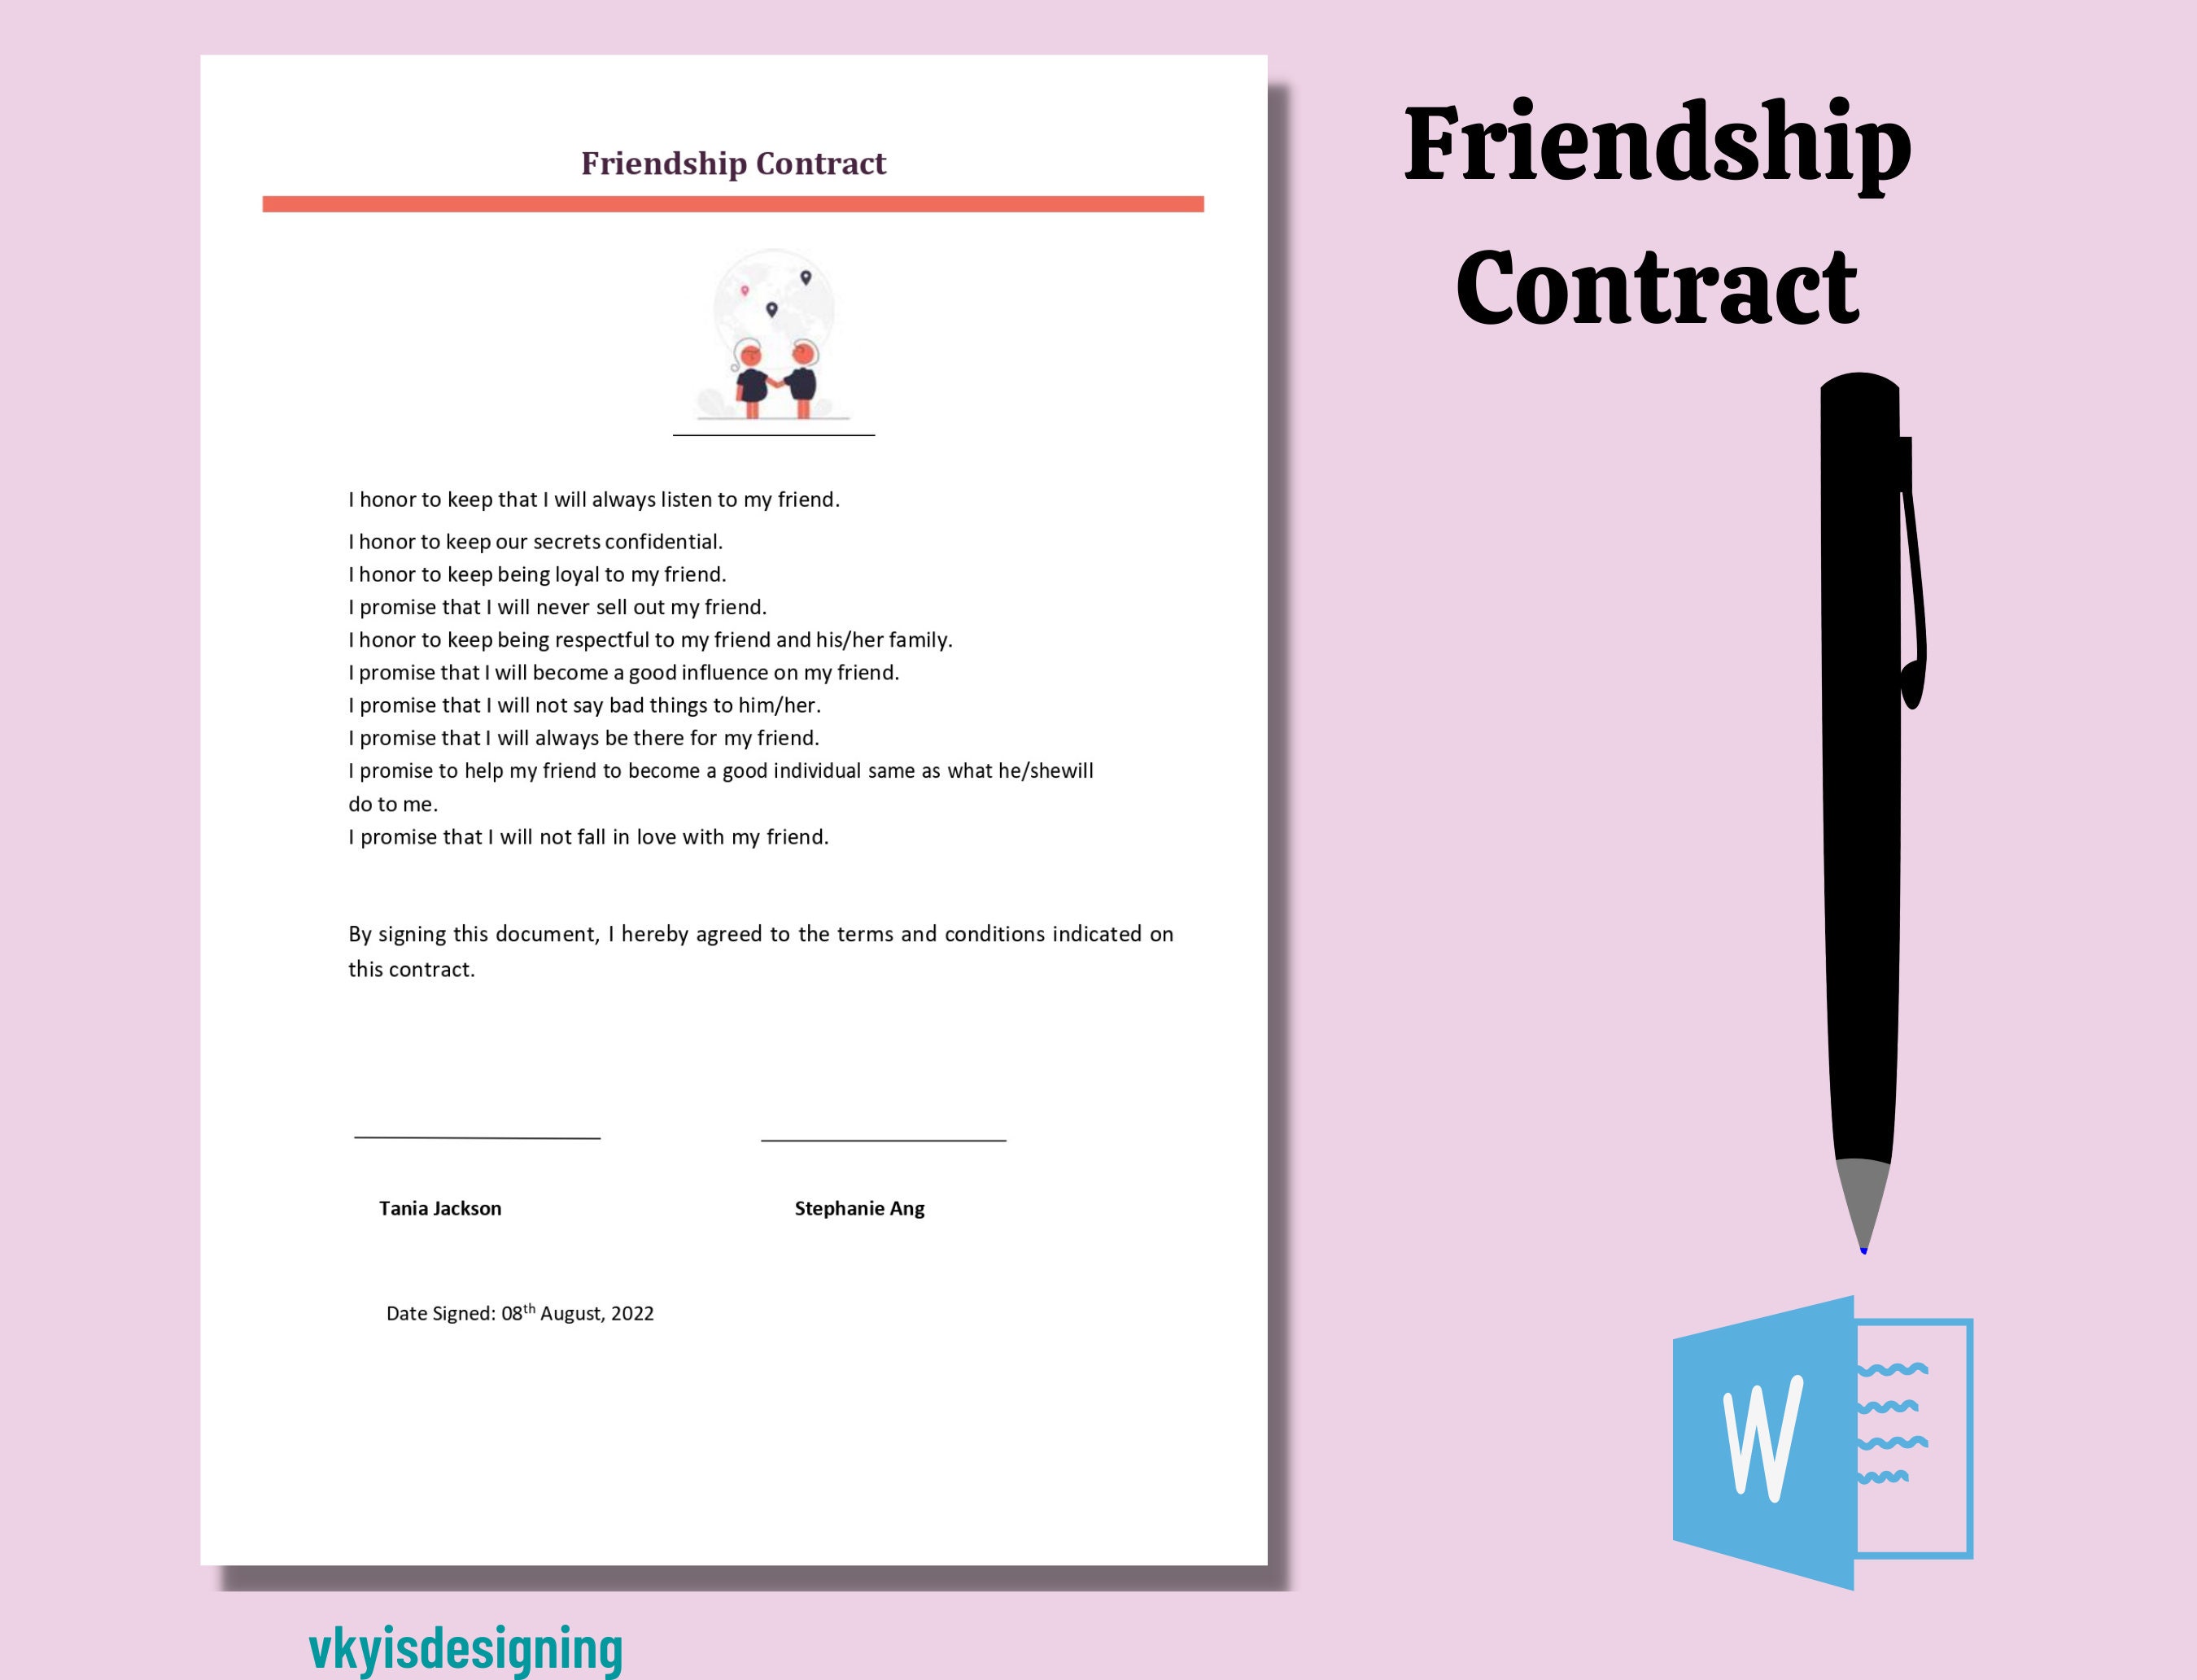 friendship-contract-relationship-agreement-buddy-contract-etsy